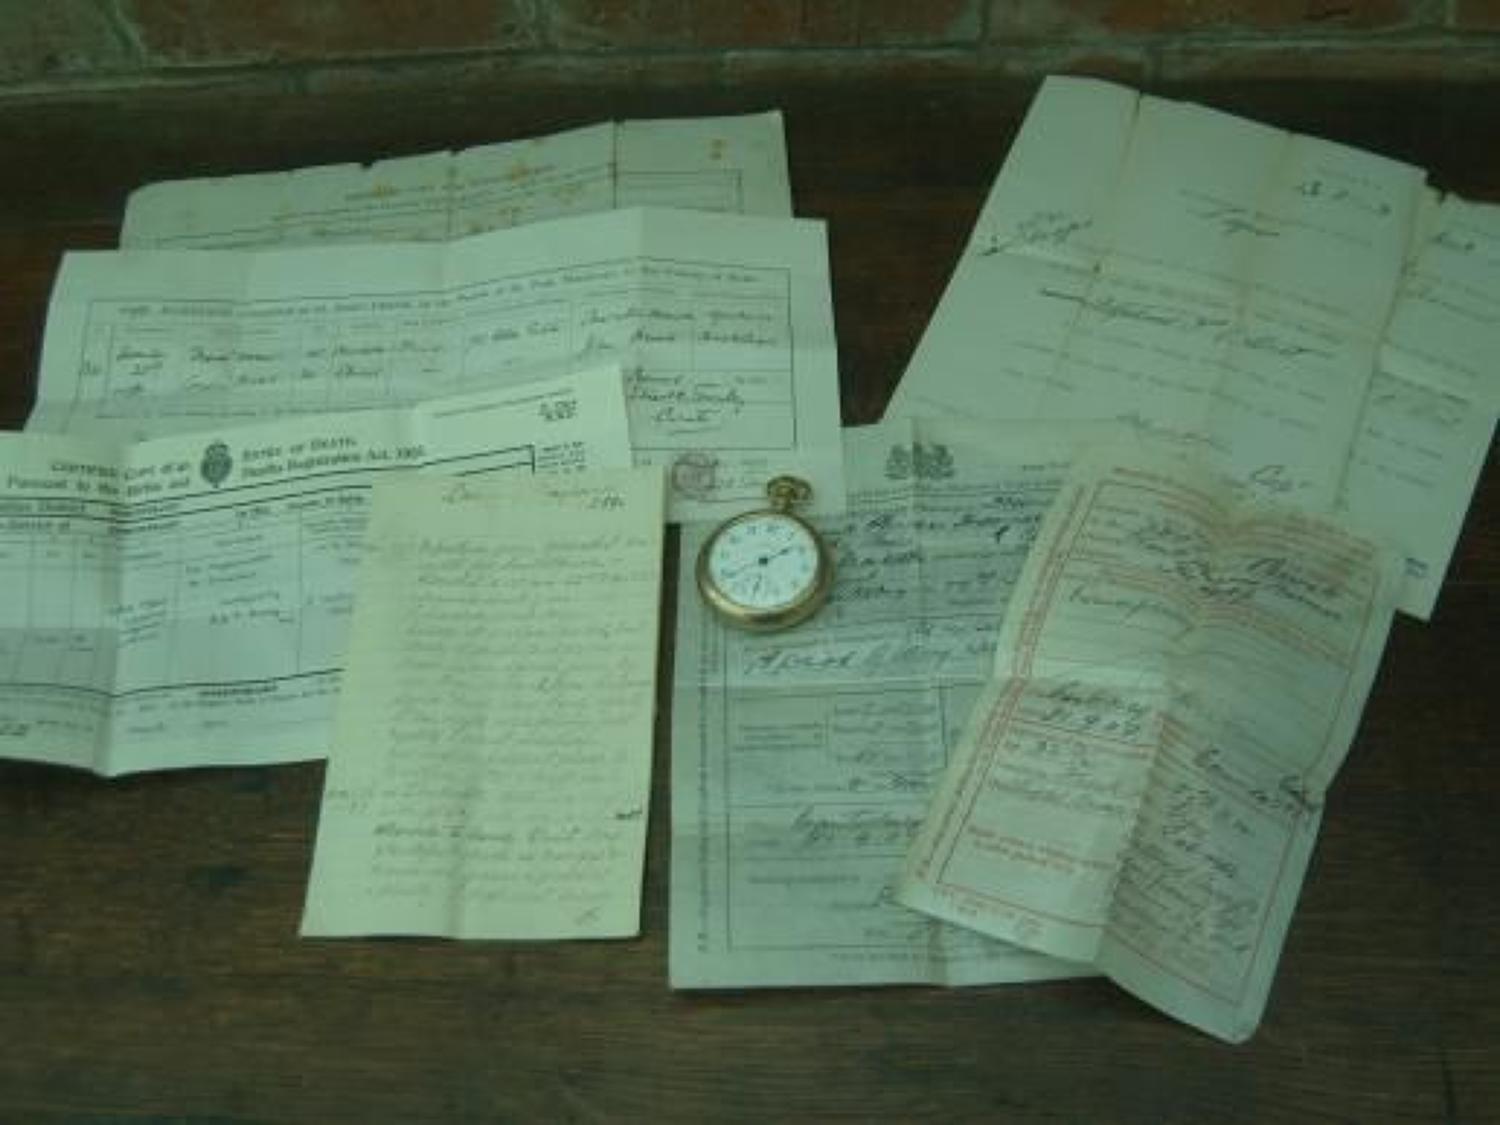 Boer War veterans Gold pocket watch,discharge papers and Diary.